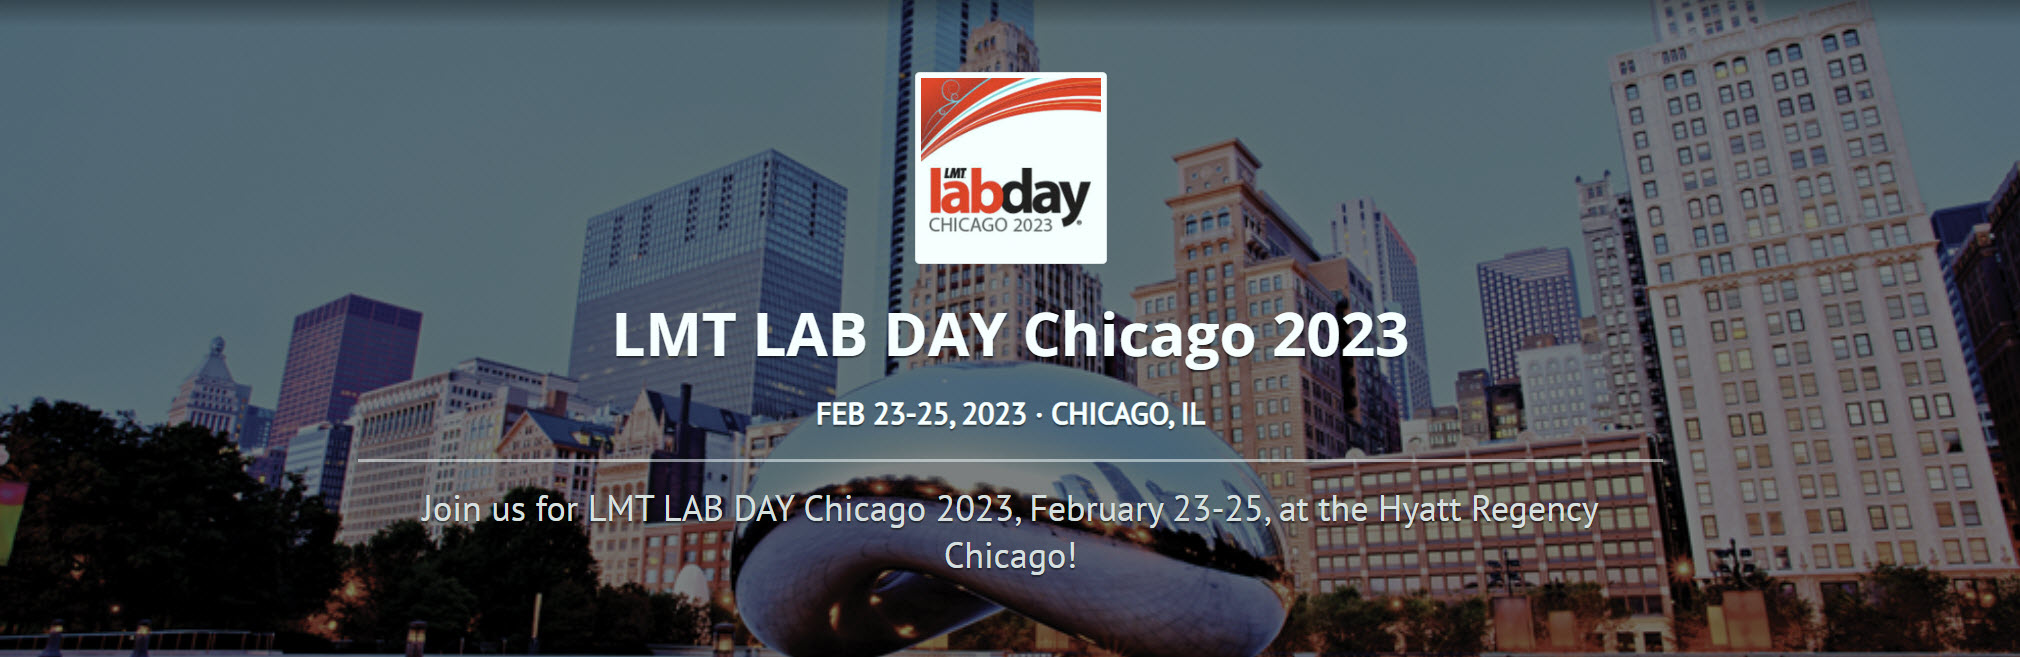 LMT LAB DAY CHICAGO 2023 BEGO USA